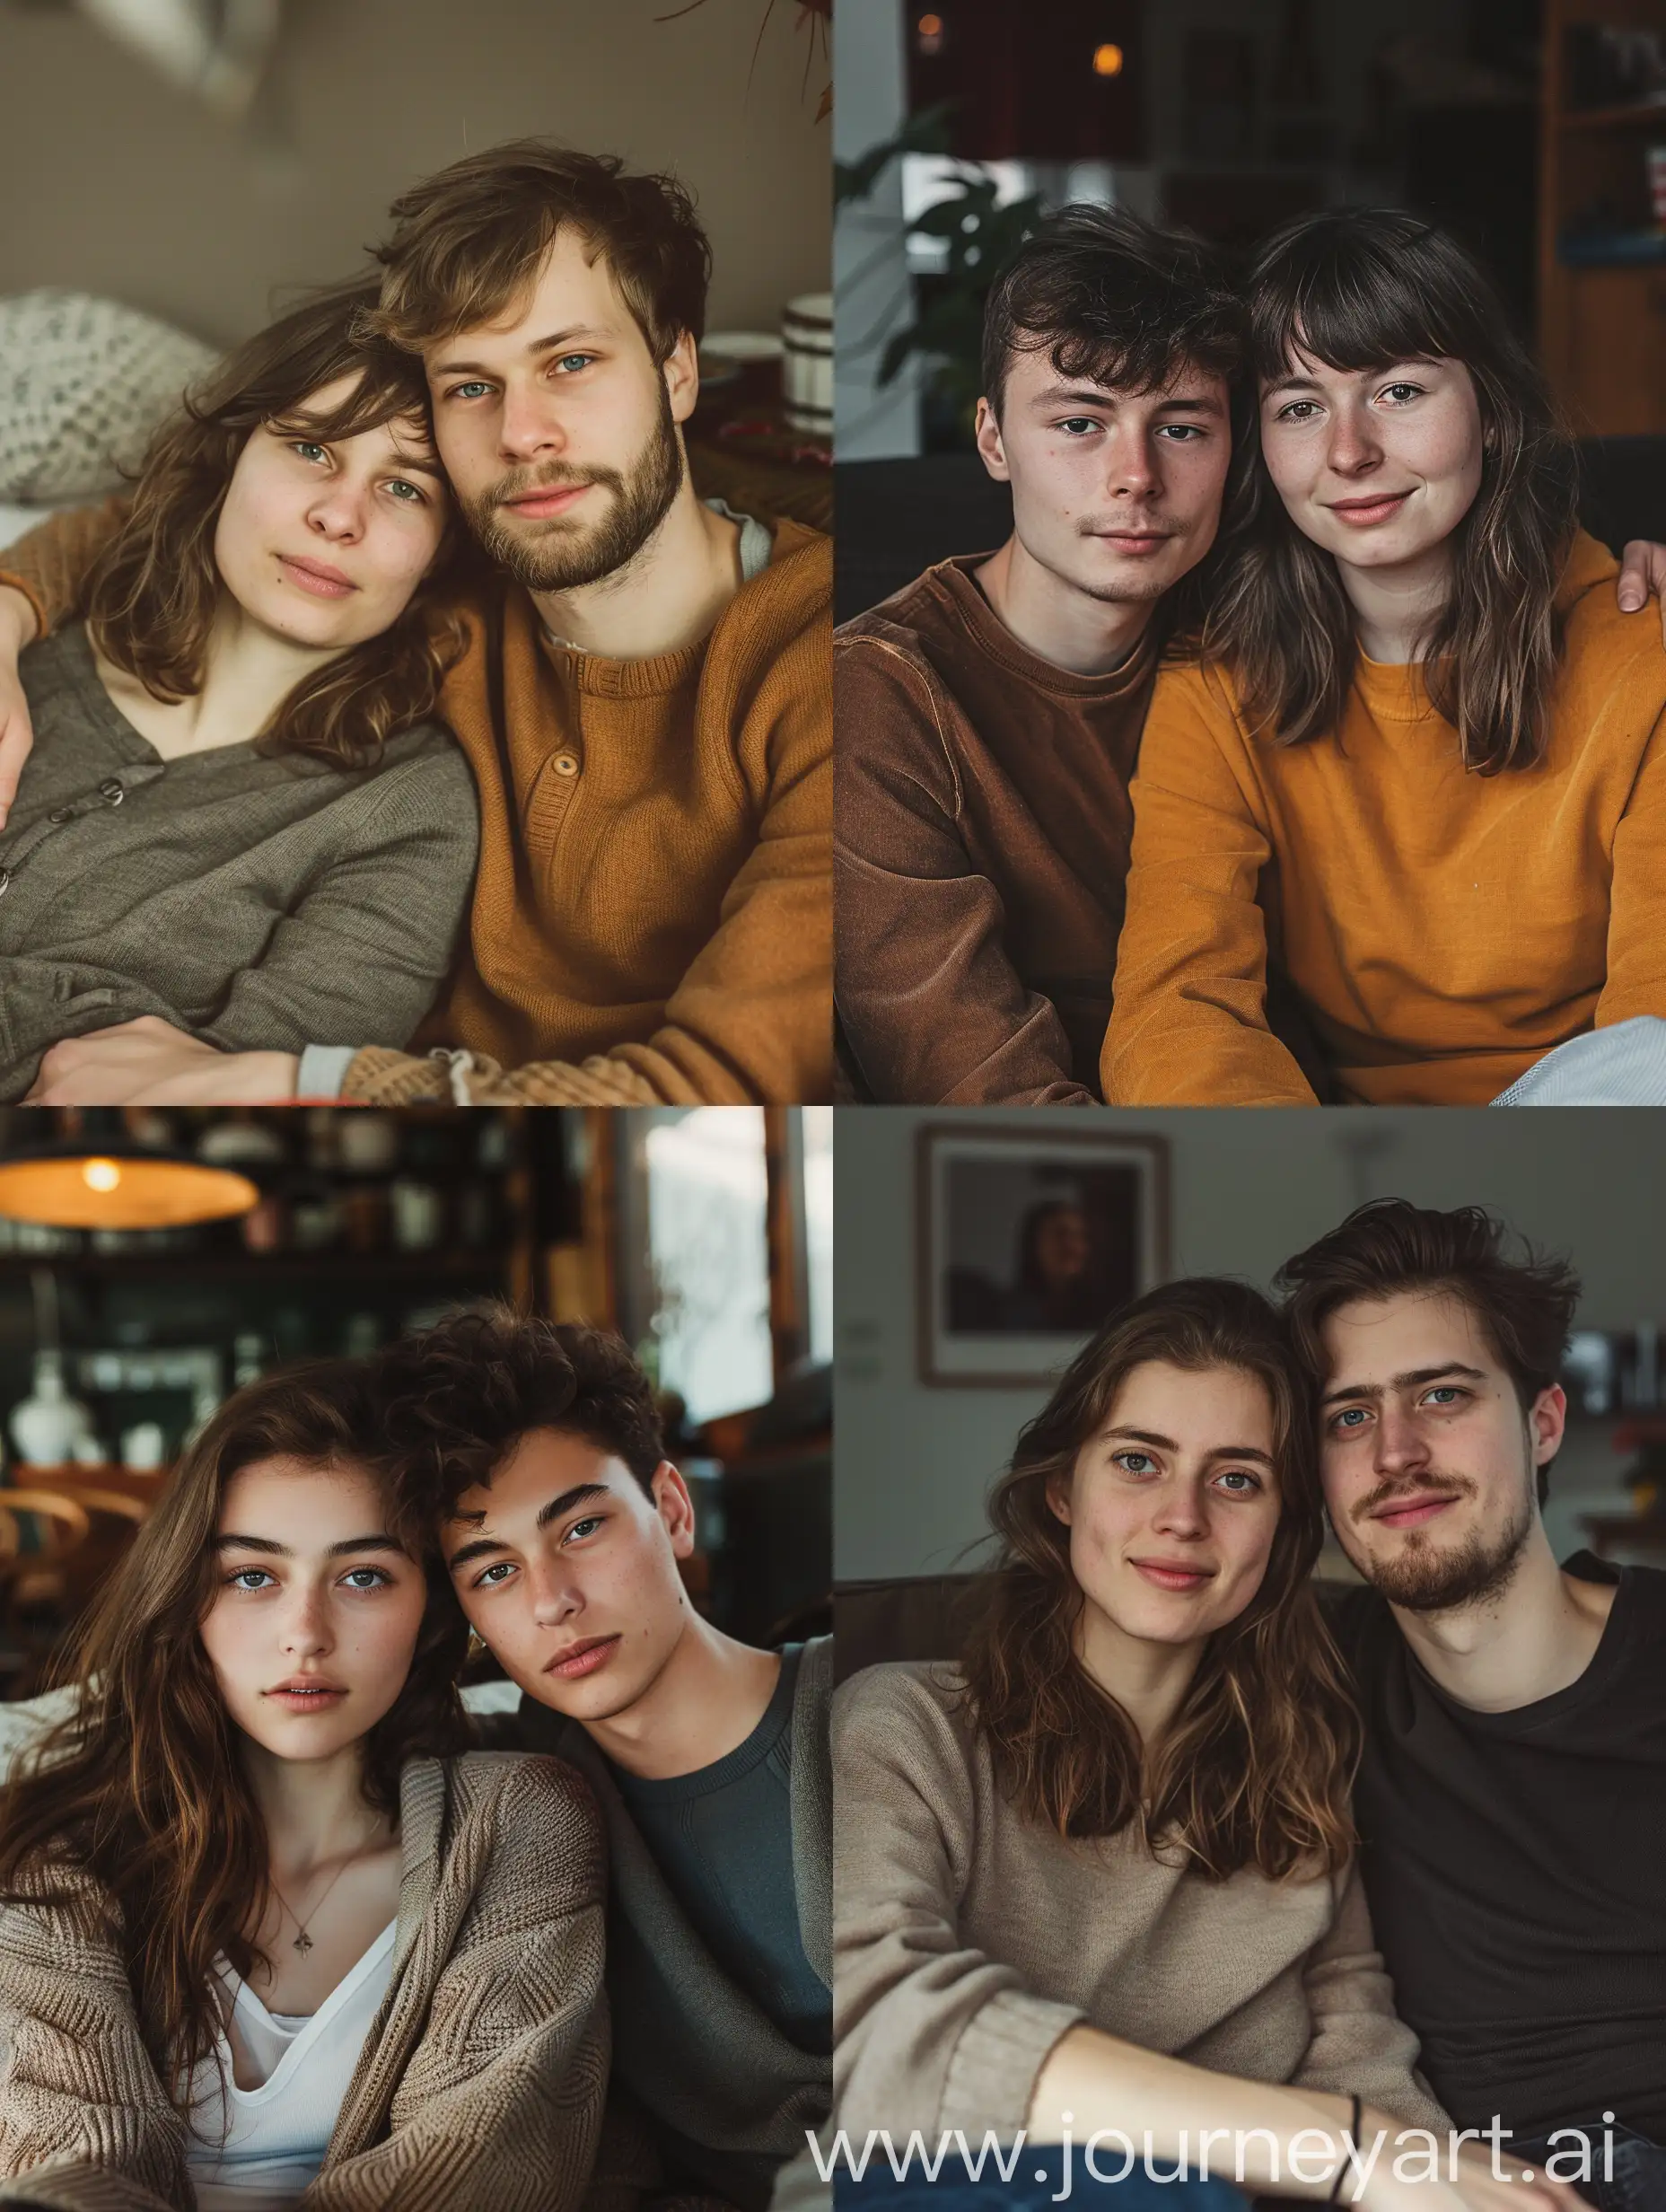 Loving couple young woman and man sitting on a sofa in a cozy atmosphere faces clearly visible and looking at the camera natural pose realistic photo faces relaxed with a slight smile high quality photo 